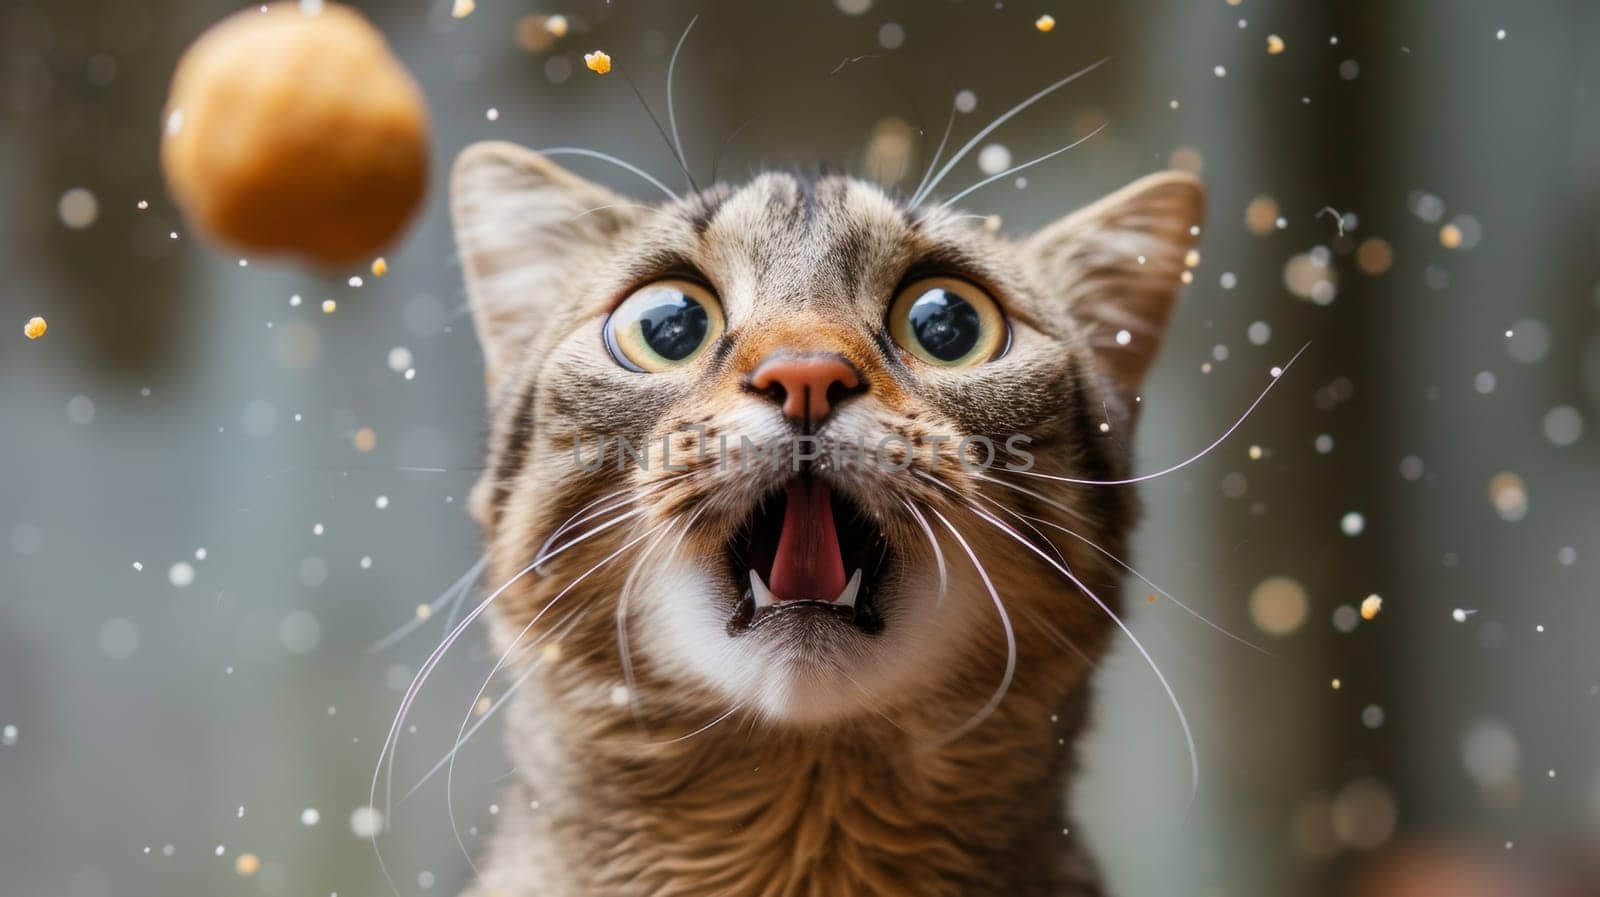 A cat with its mouth open and a ball of food in the air